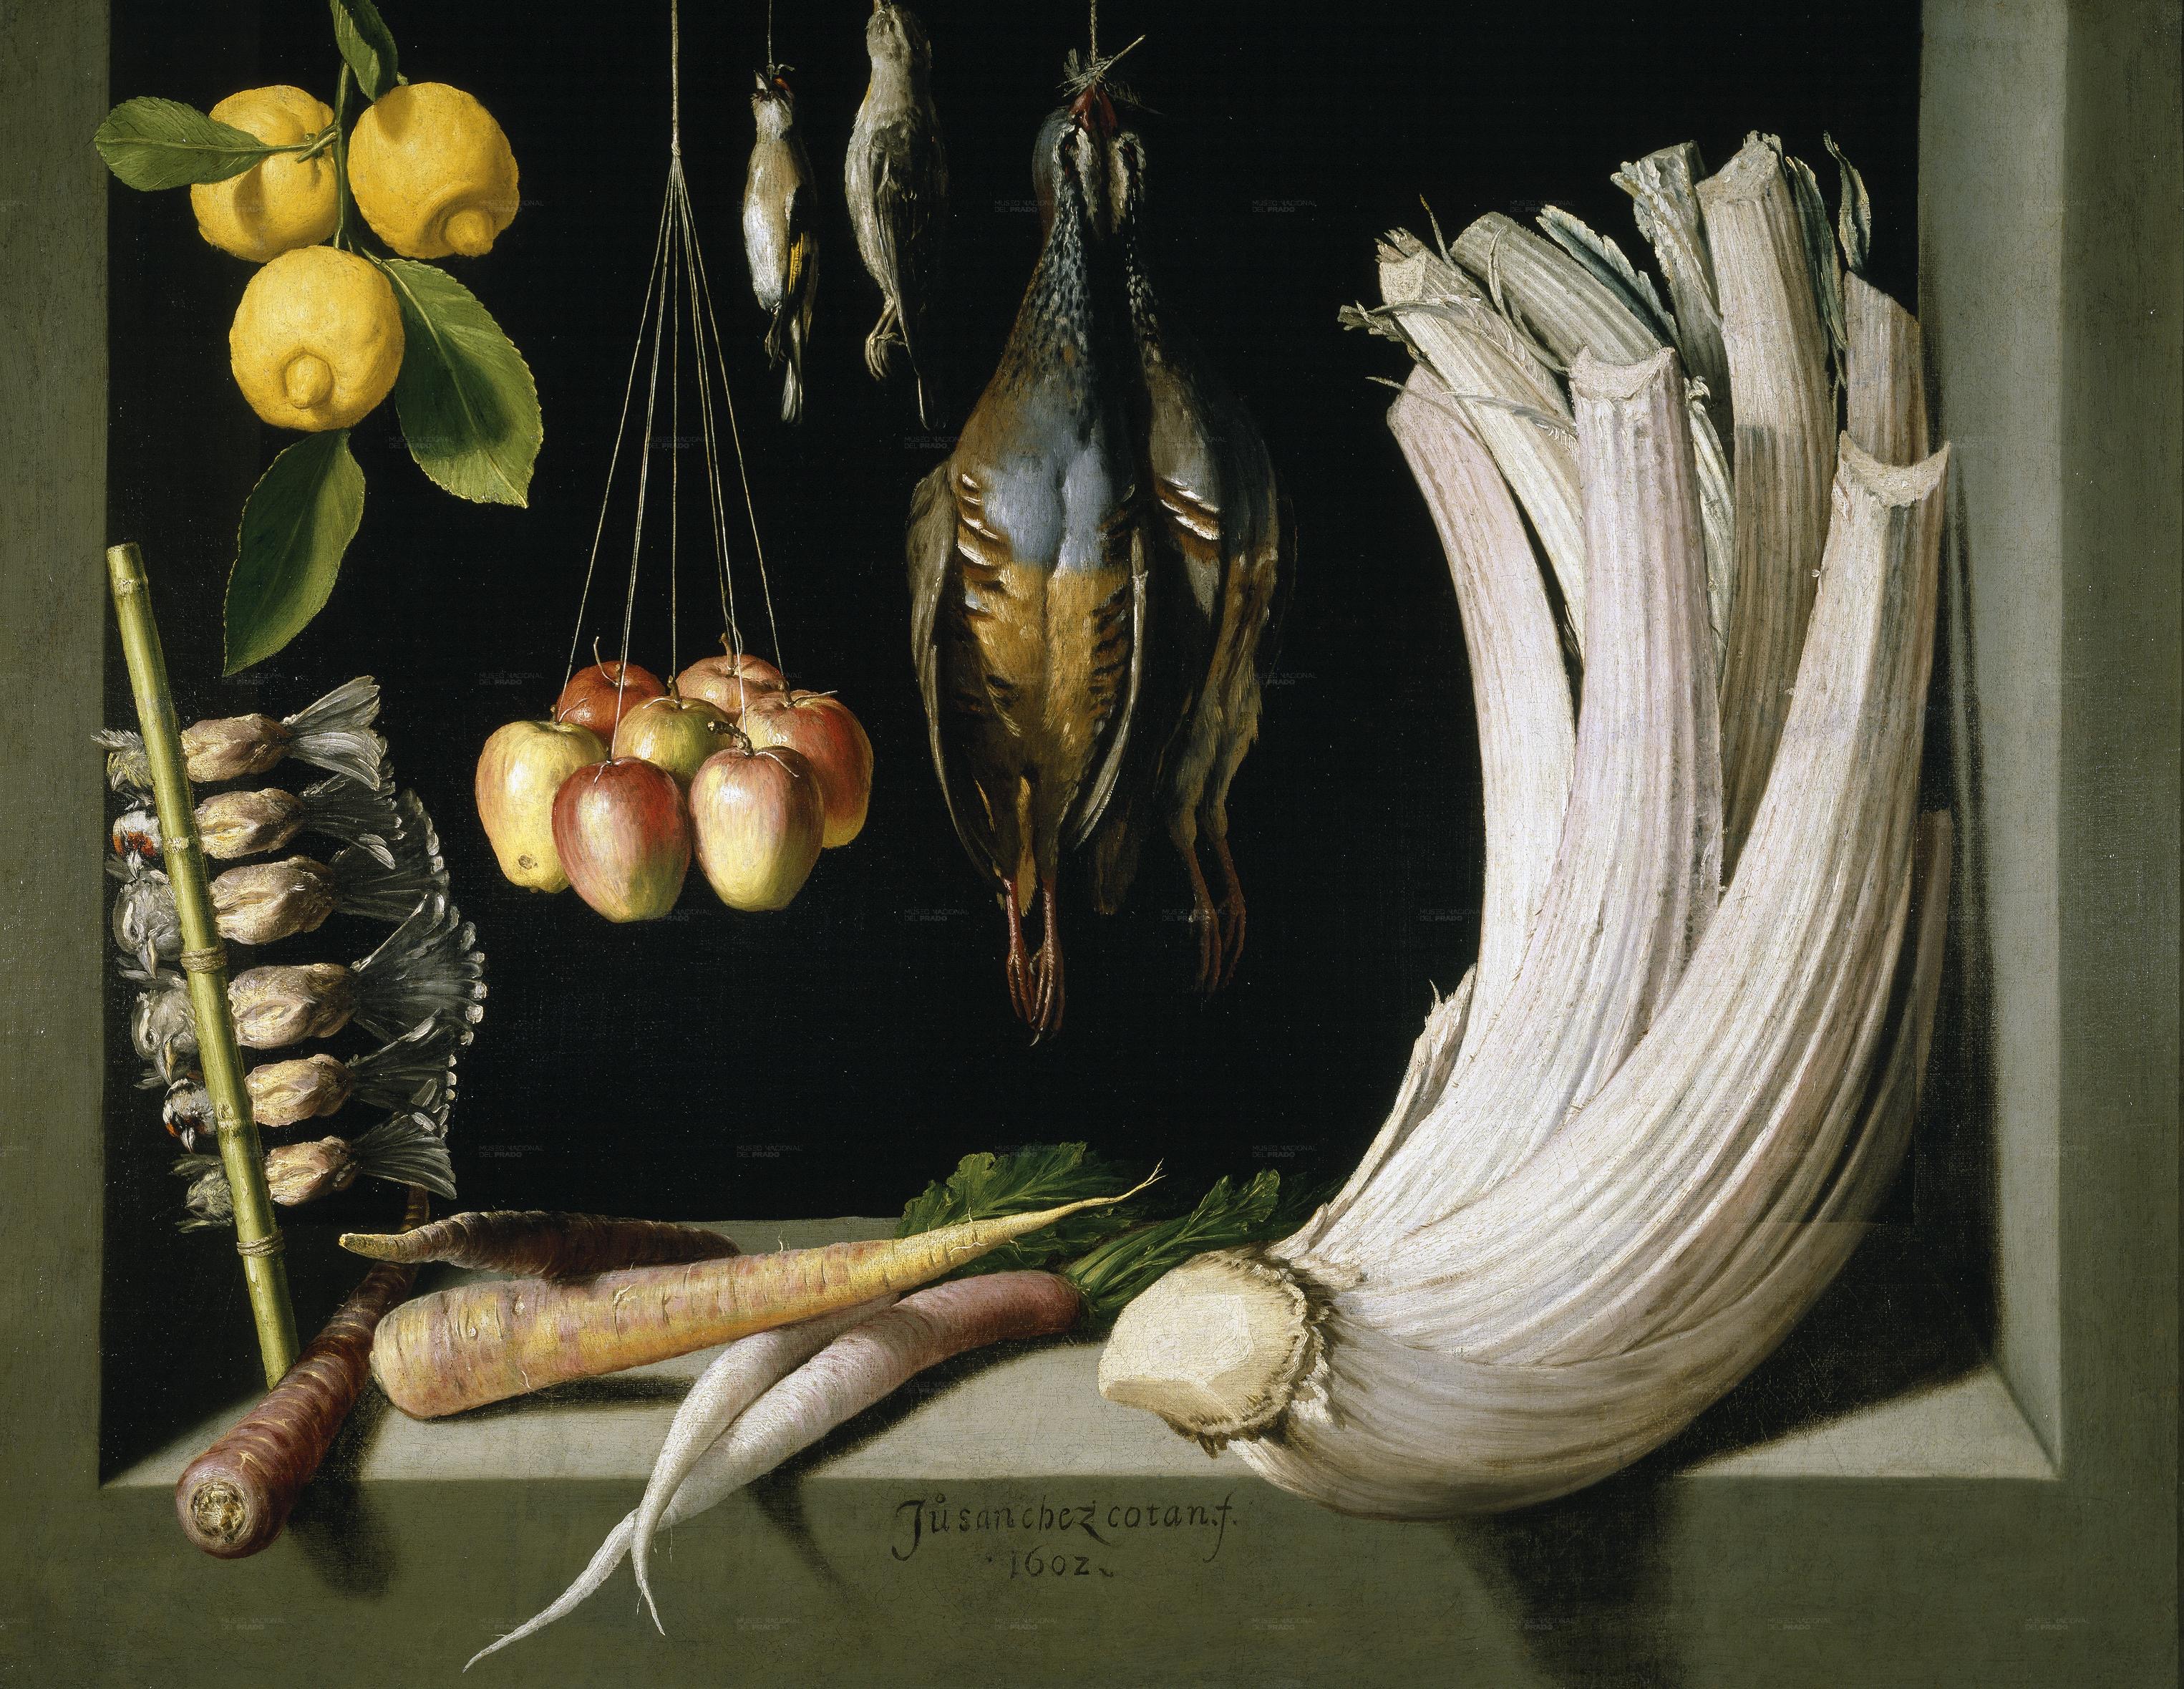 Still_Life_with_Game_Fowl,Vegetables_and_Fruits,_Prado,_Museum,Madrid,1602,HernaniCollection